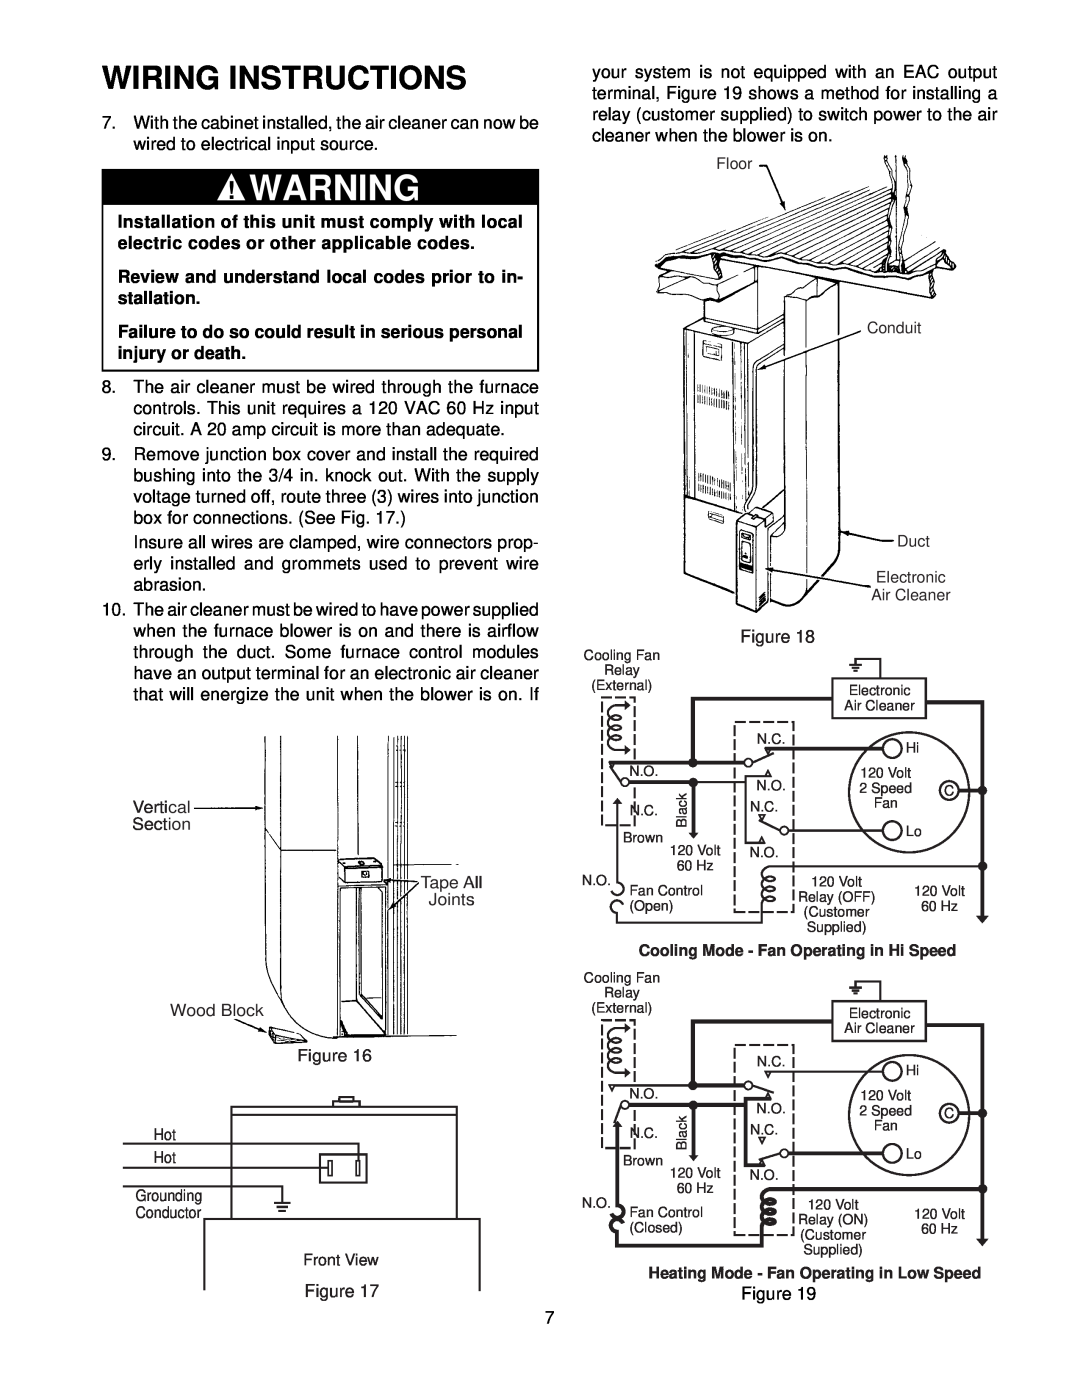 Emerson 16C26S-010 owner manual Wiring Instructions 